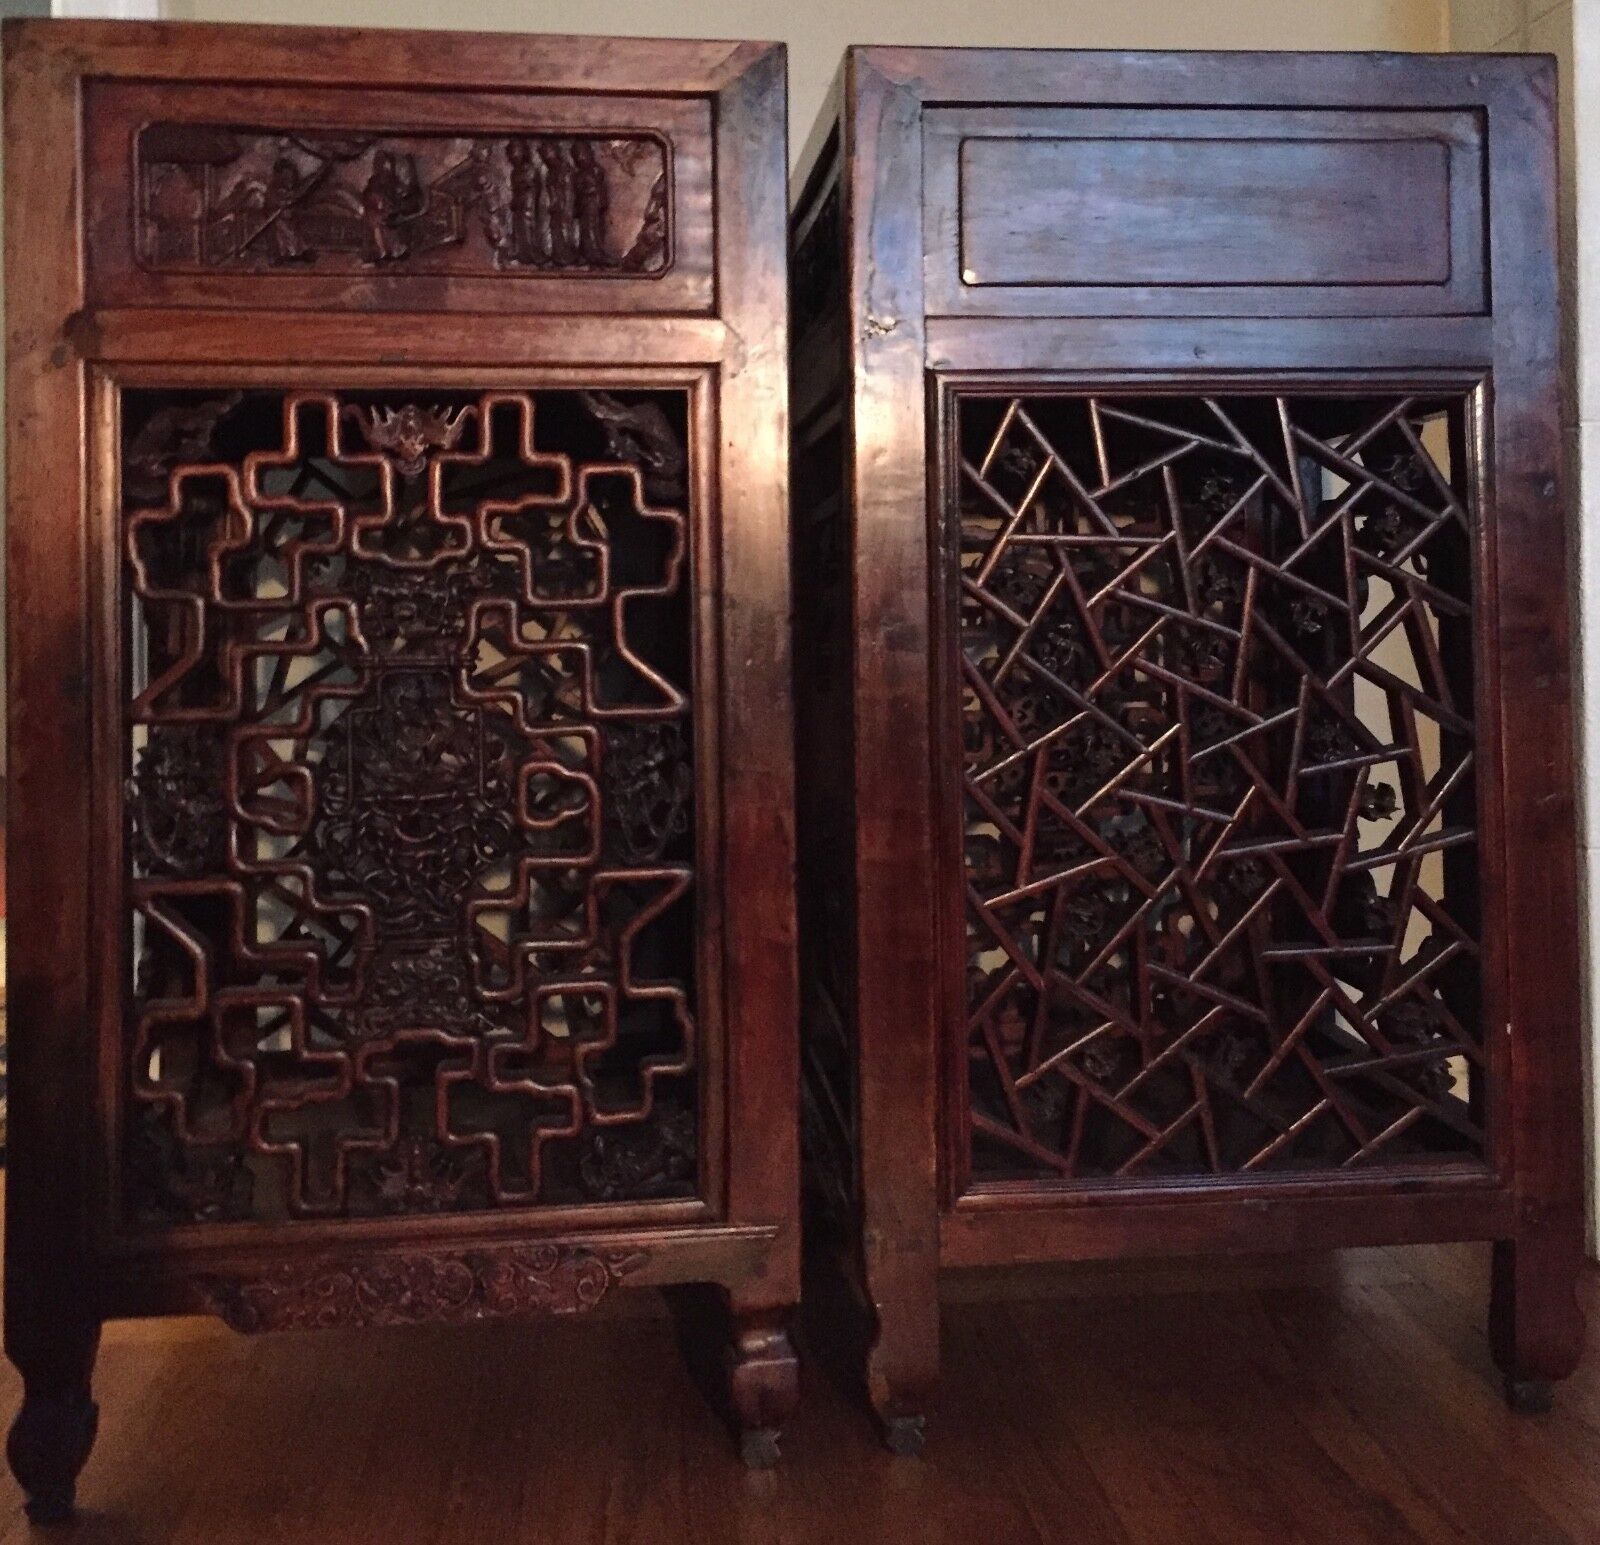 Antique Carved Chinese Side Tables, Qing Period, circa 1870 - a Pair Без бренда - фотография #4